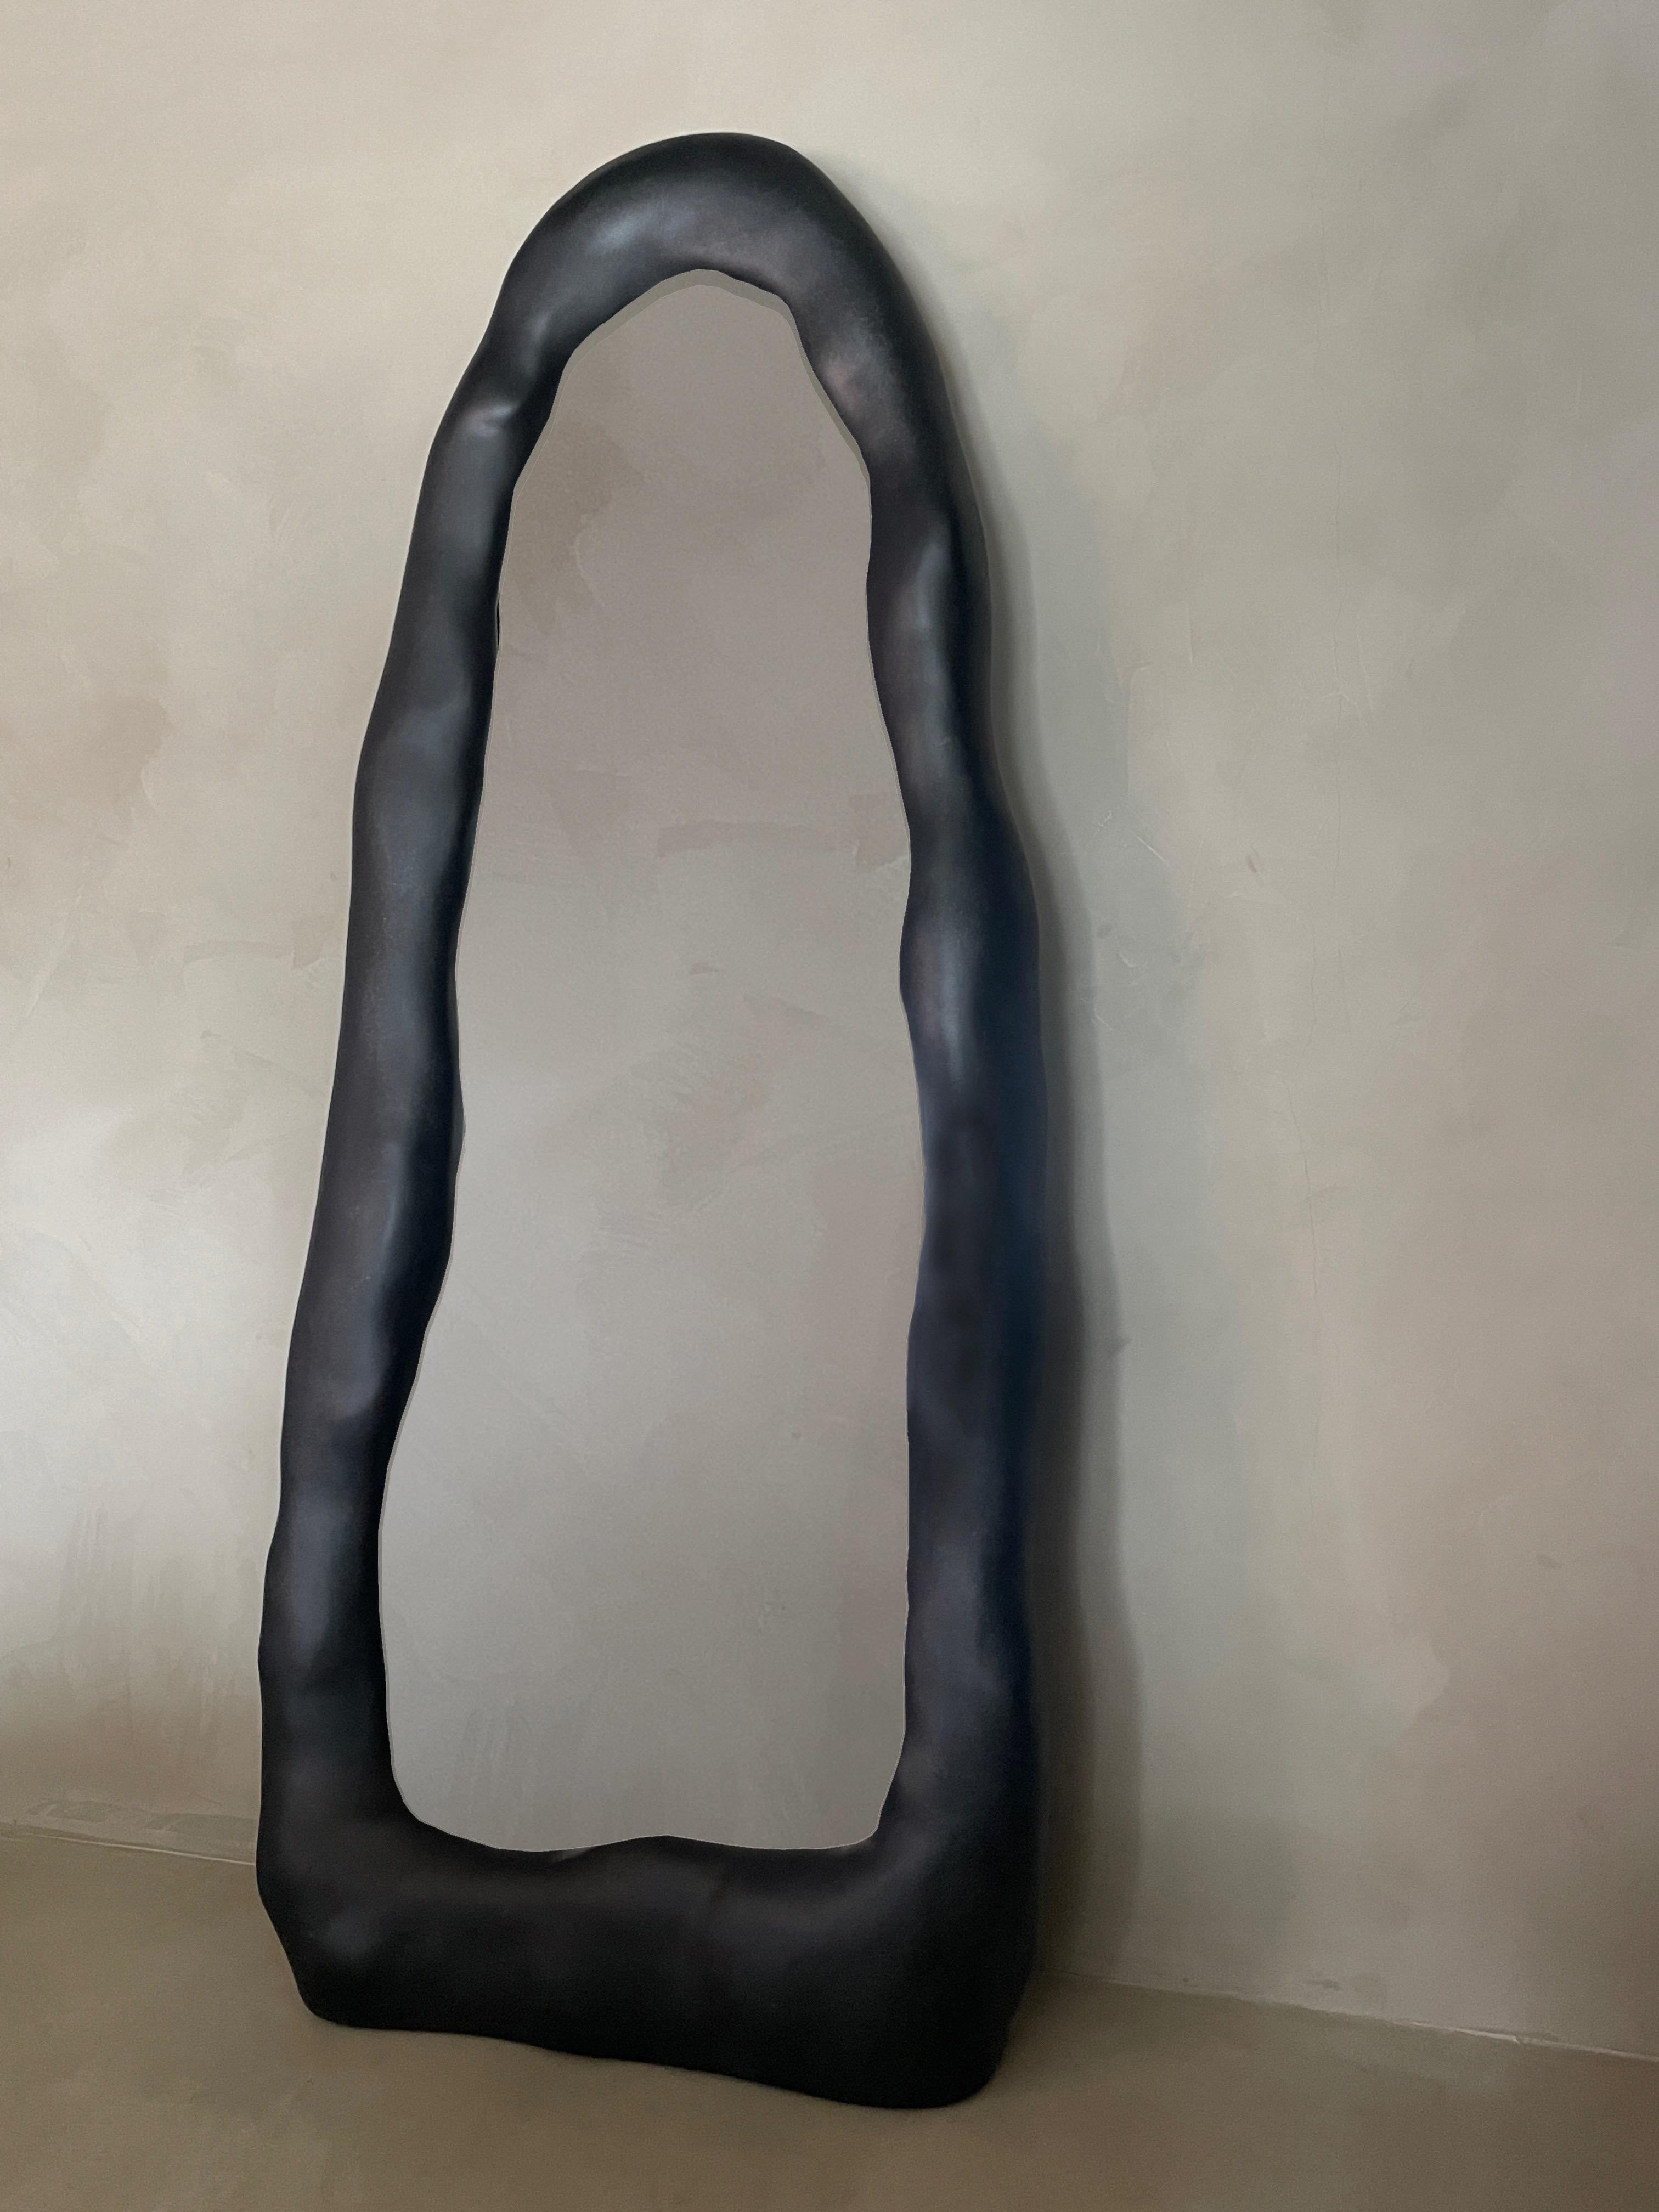 Black Knead Mirror by Karstudio
Materials: Fiberglass
Dimensions: W 80 x D 22 x H 193 cm

Knead mirror preserves the handmade traces of clay-kneading, and the hand-polished
texture captures the aesthetic and emotion of creation. The mirror is